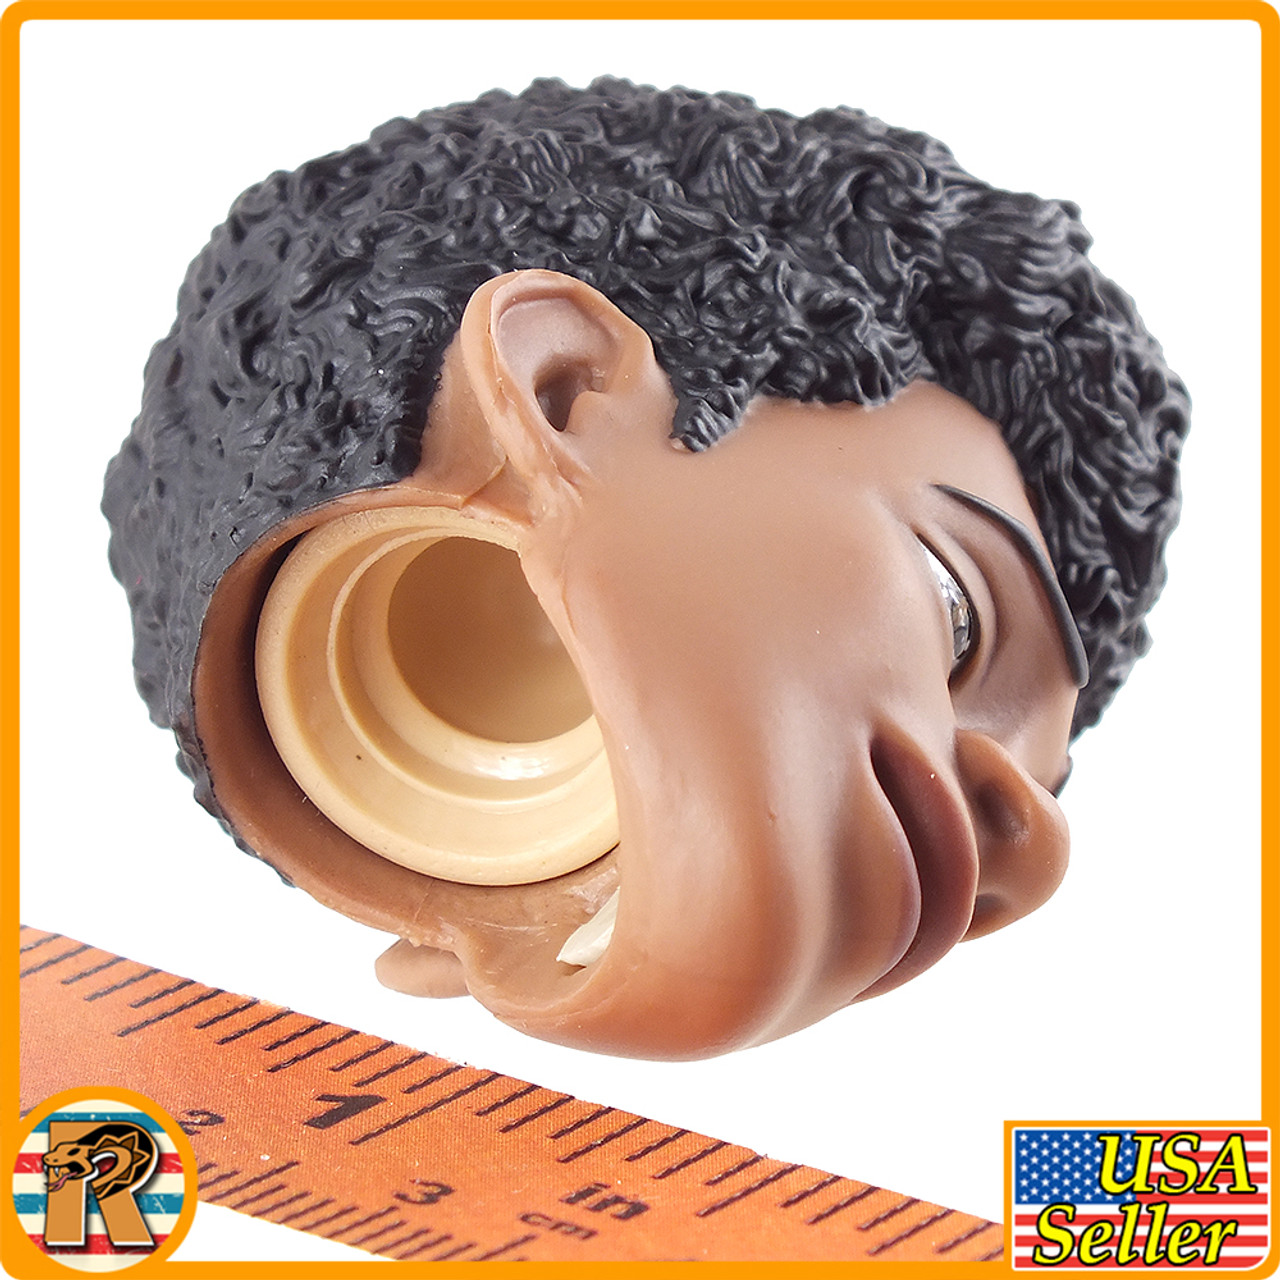 Miles Morales 3.0 - Smiling Head # 2 - 1/6 Scale -